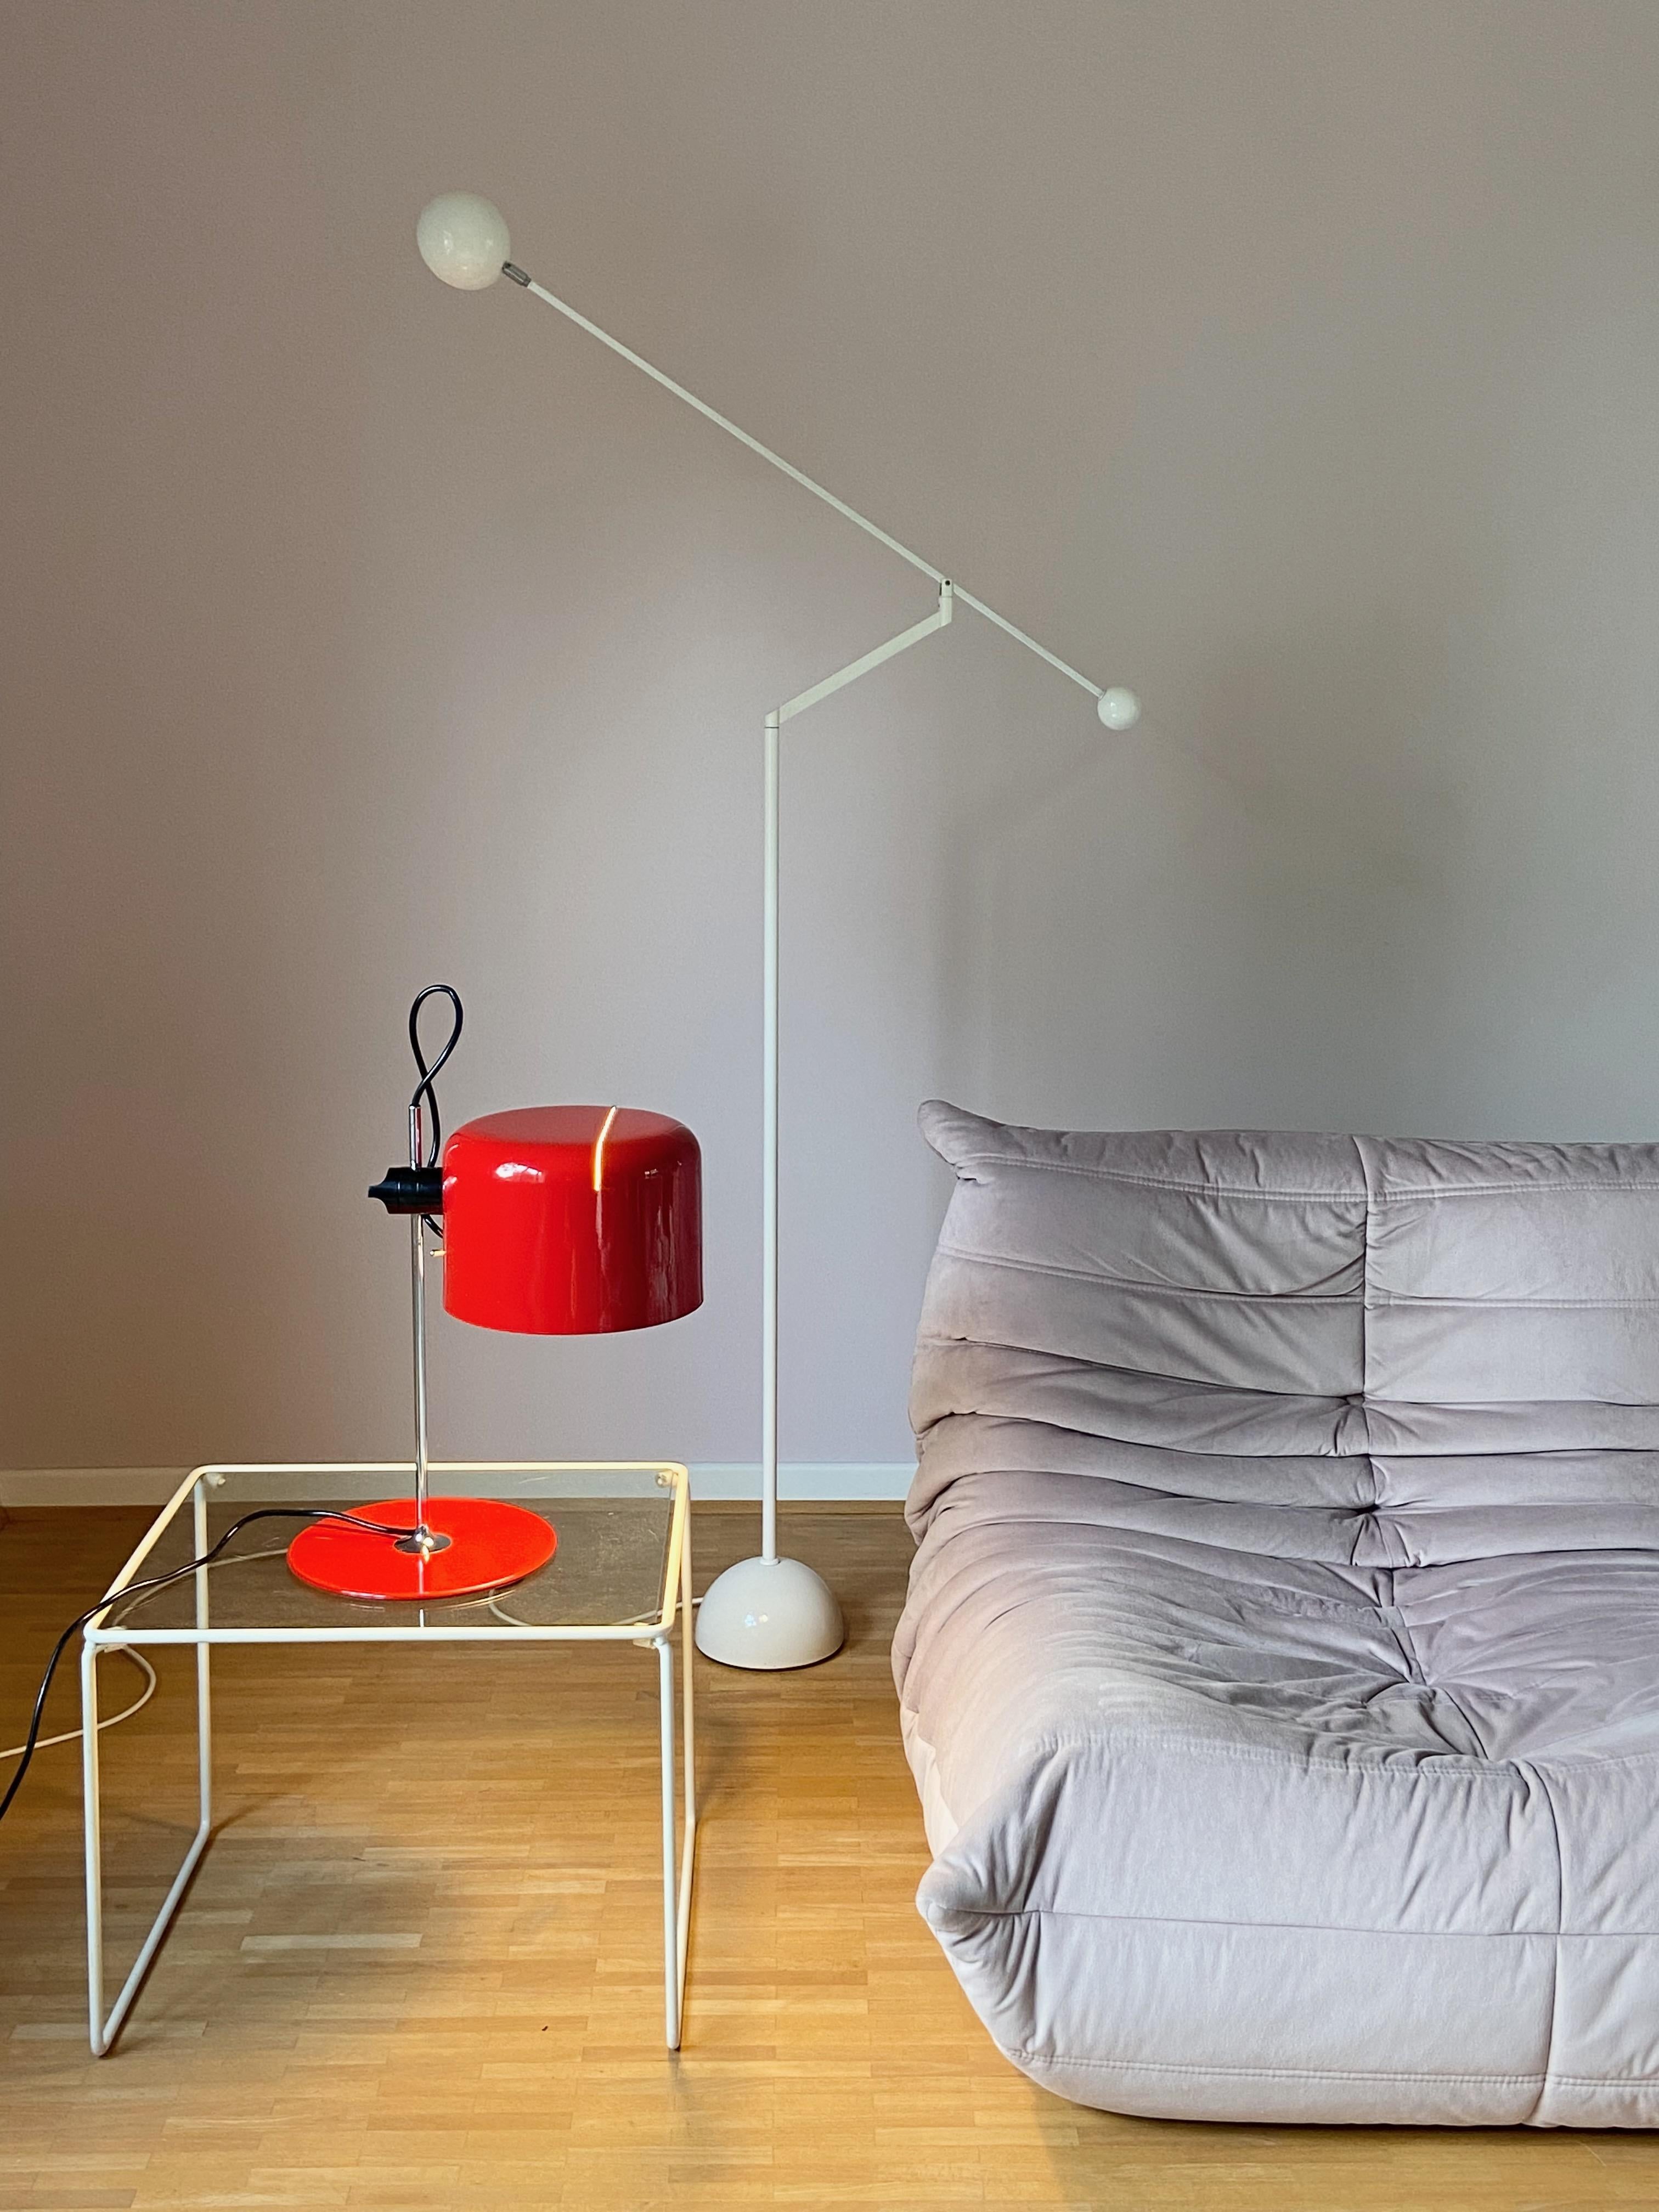 Very nice red Coupe table lamp designed by Joe Colombo 1967 and produced by Oluce, Italy. The lamp is in original paint (red is out of production) and it  is a early Edition. Shade in height adjustable and comes with E26/27 screw socket socket so